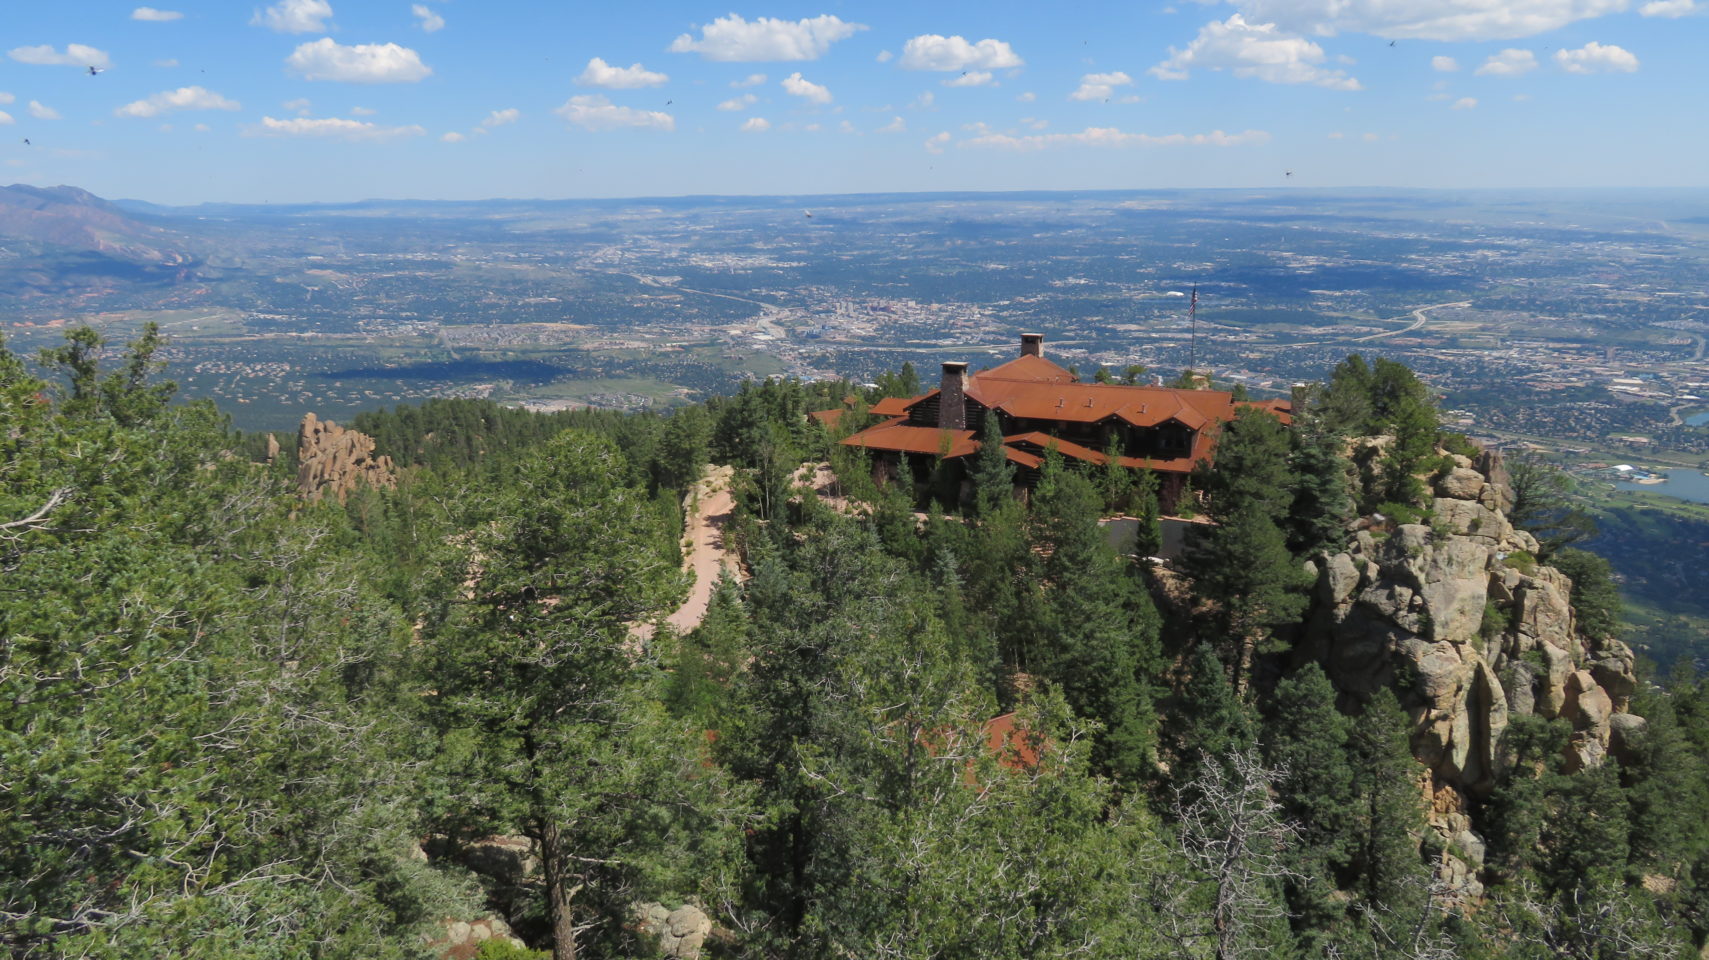 Cloud Camp, 3,000 feet above the main campus of The Broadmoor Resort & Spa